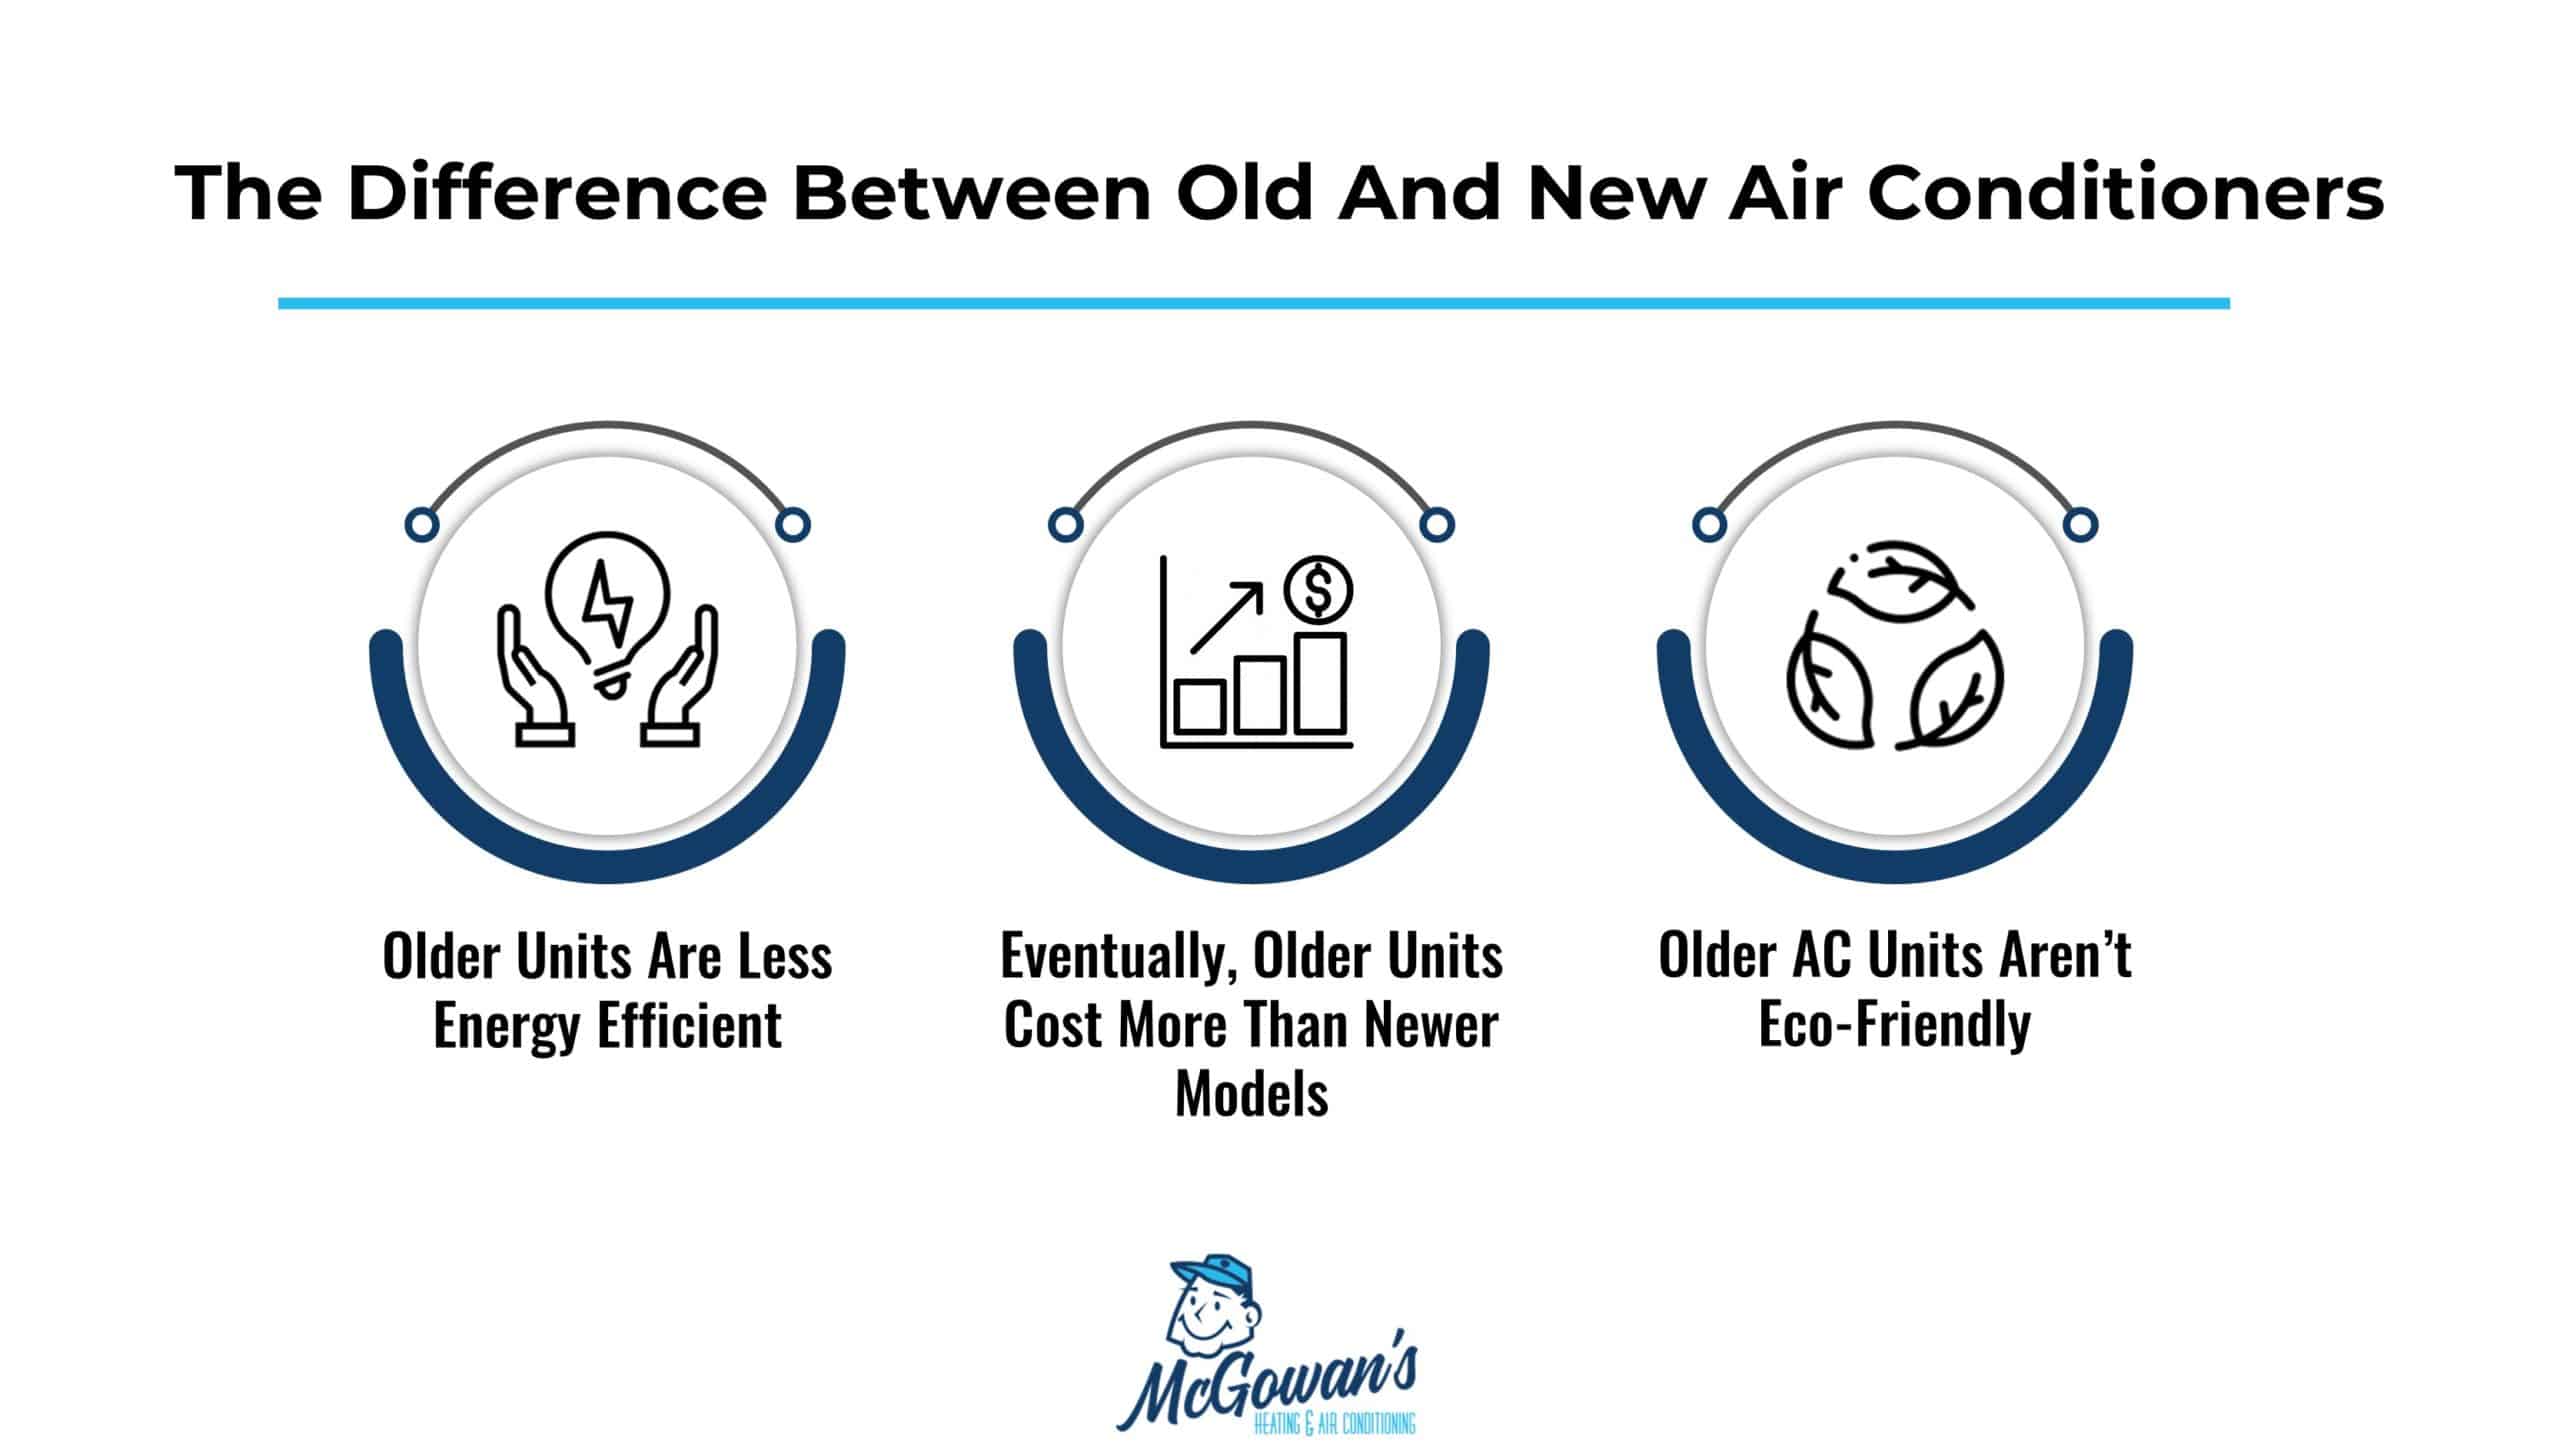 New air conditioners vs old air conditioners